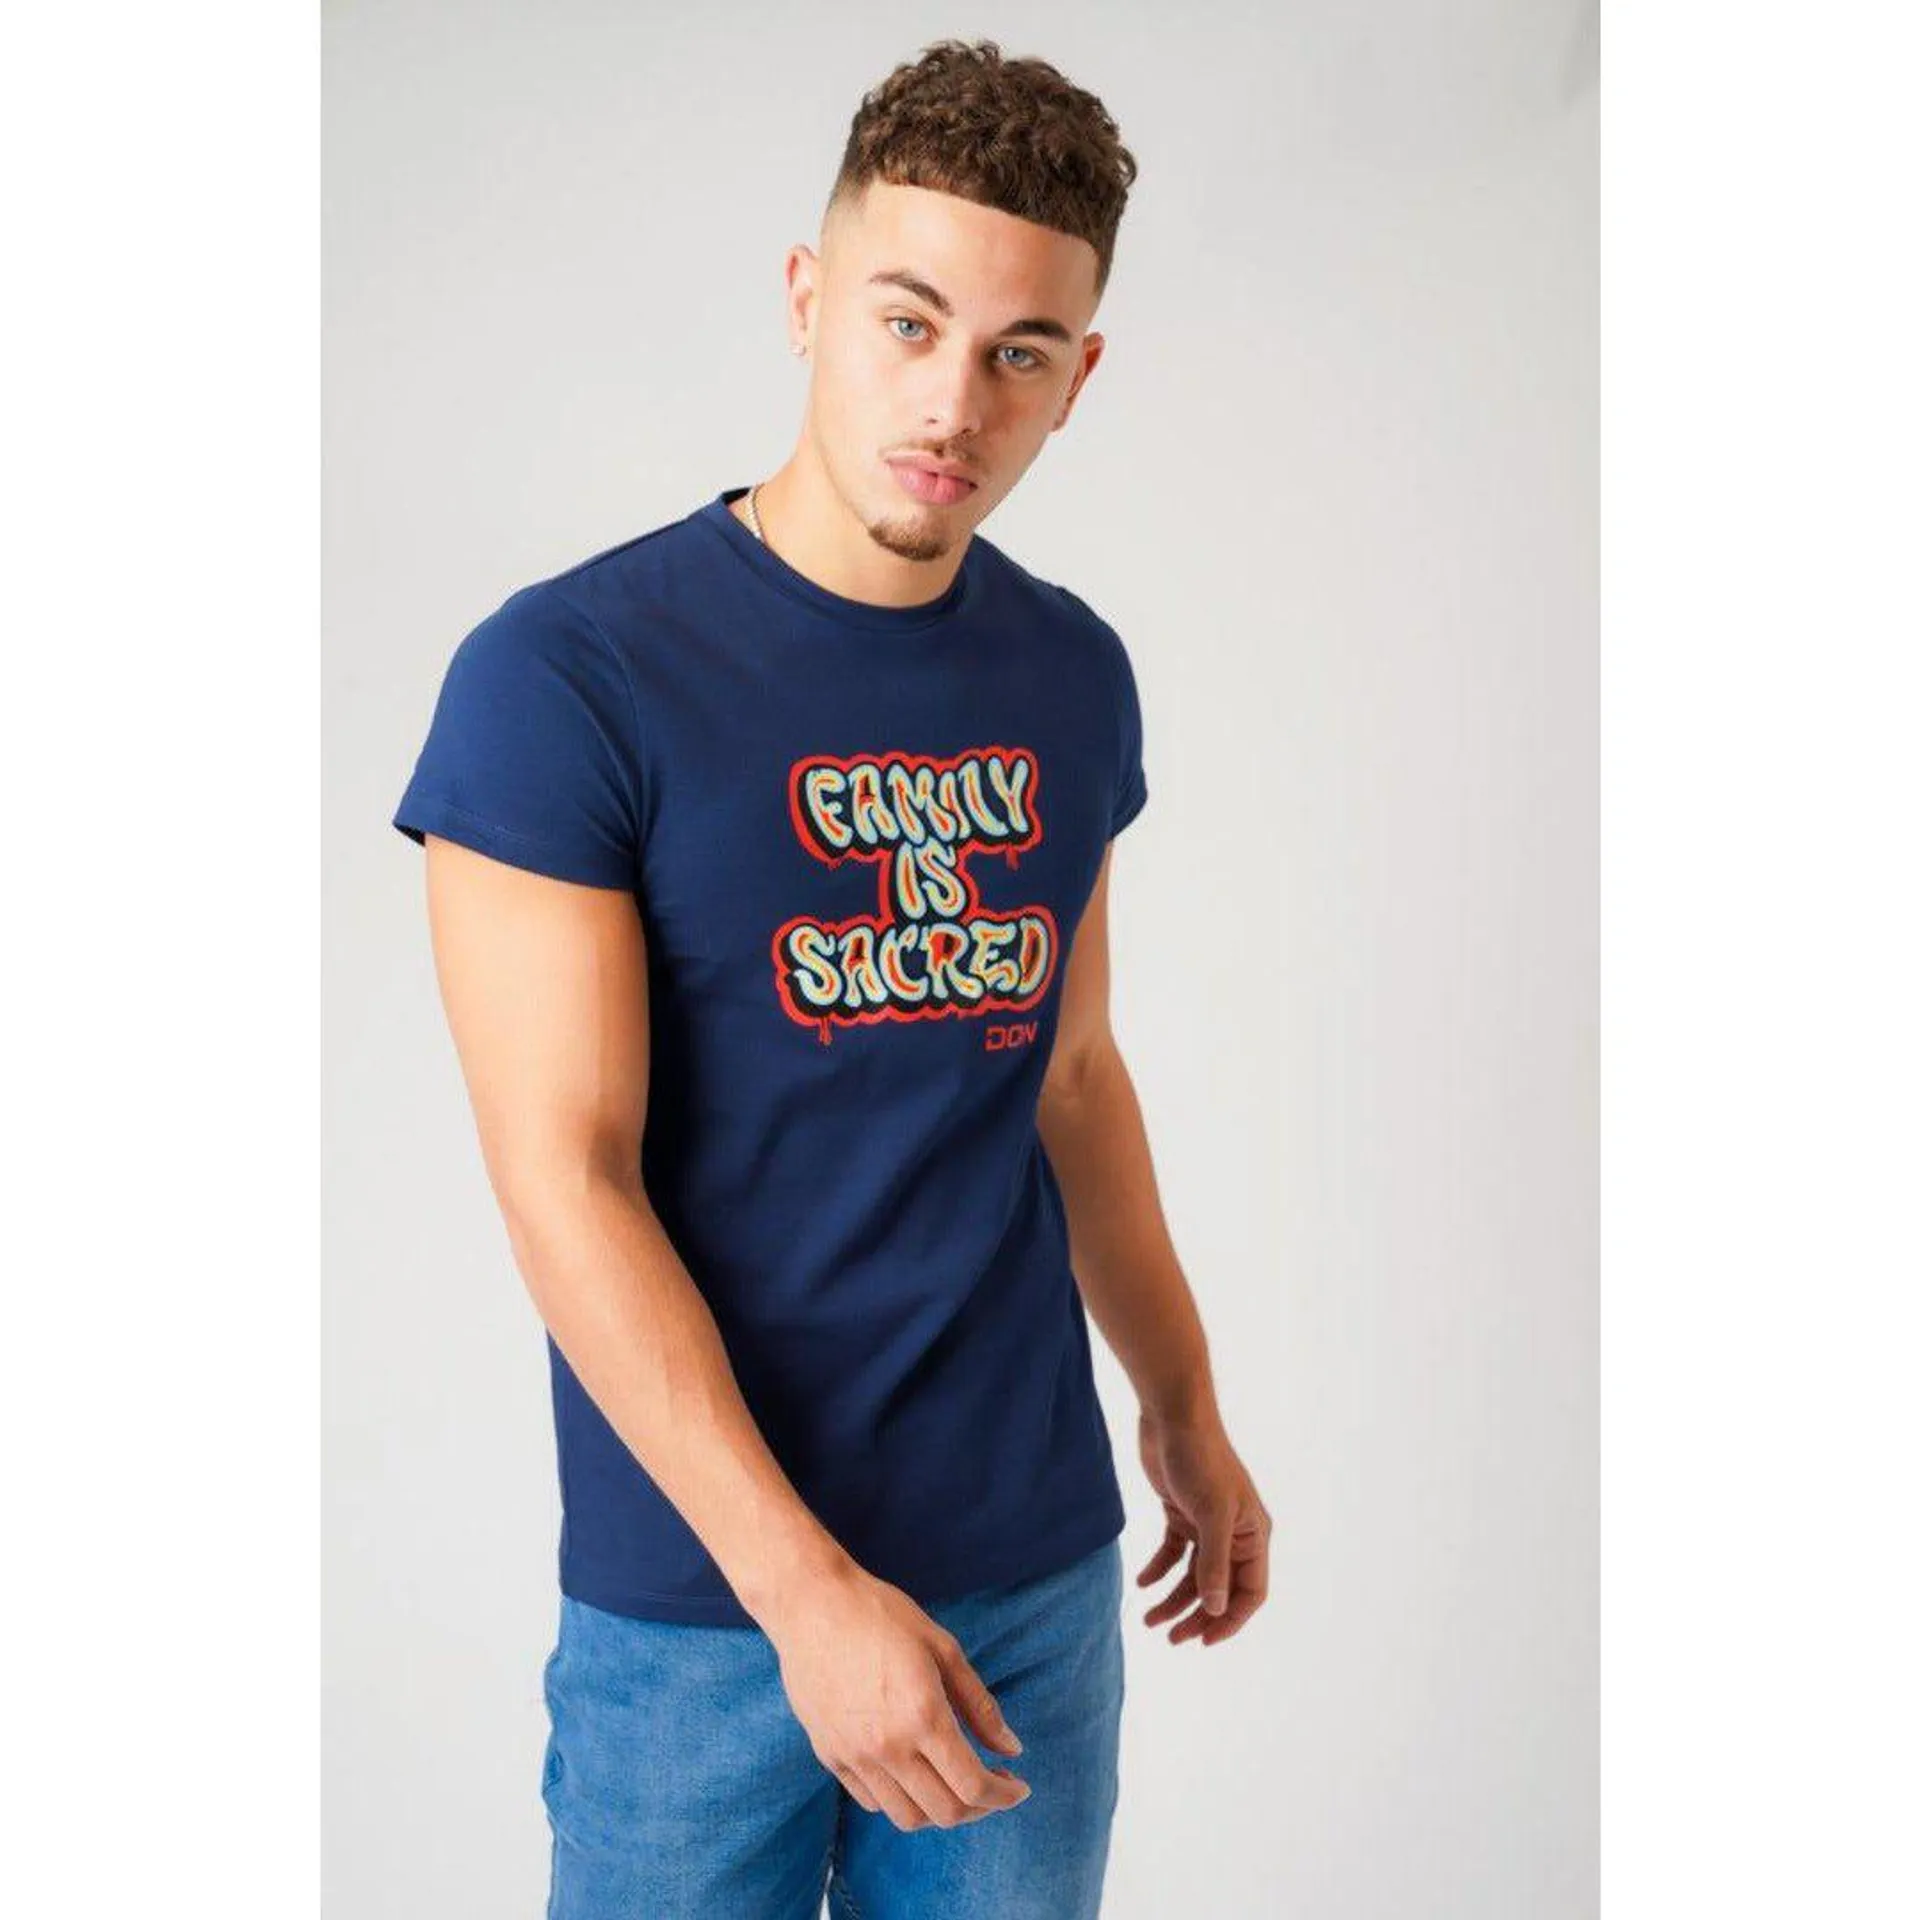 Don Jeans Family Is Sacred T-Shirt Navy